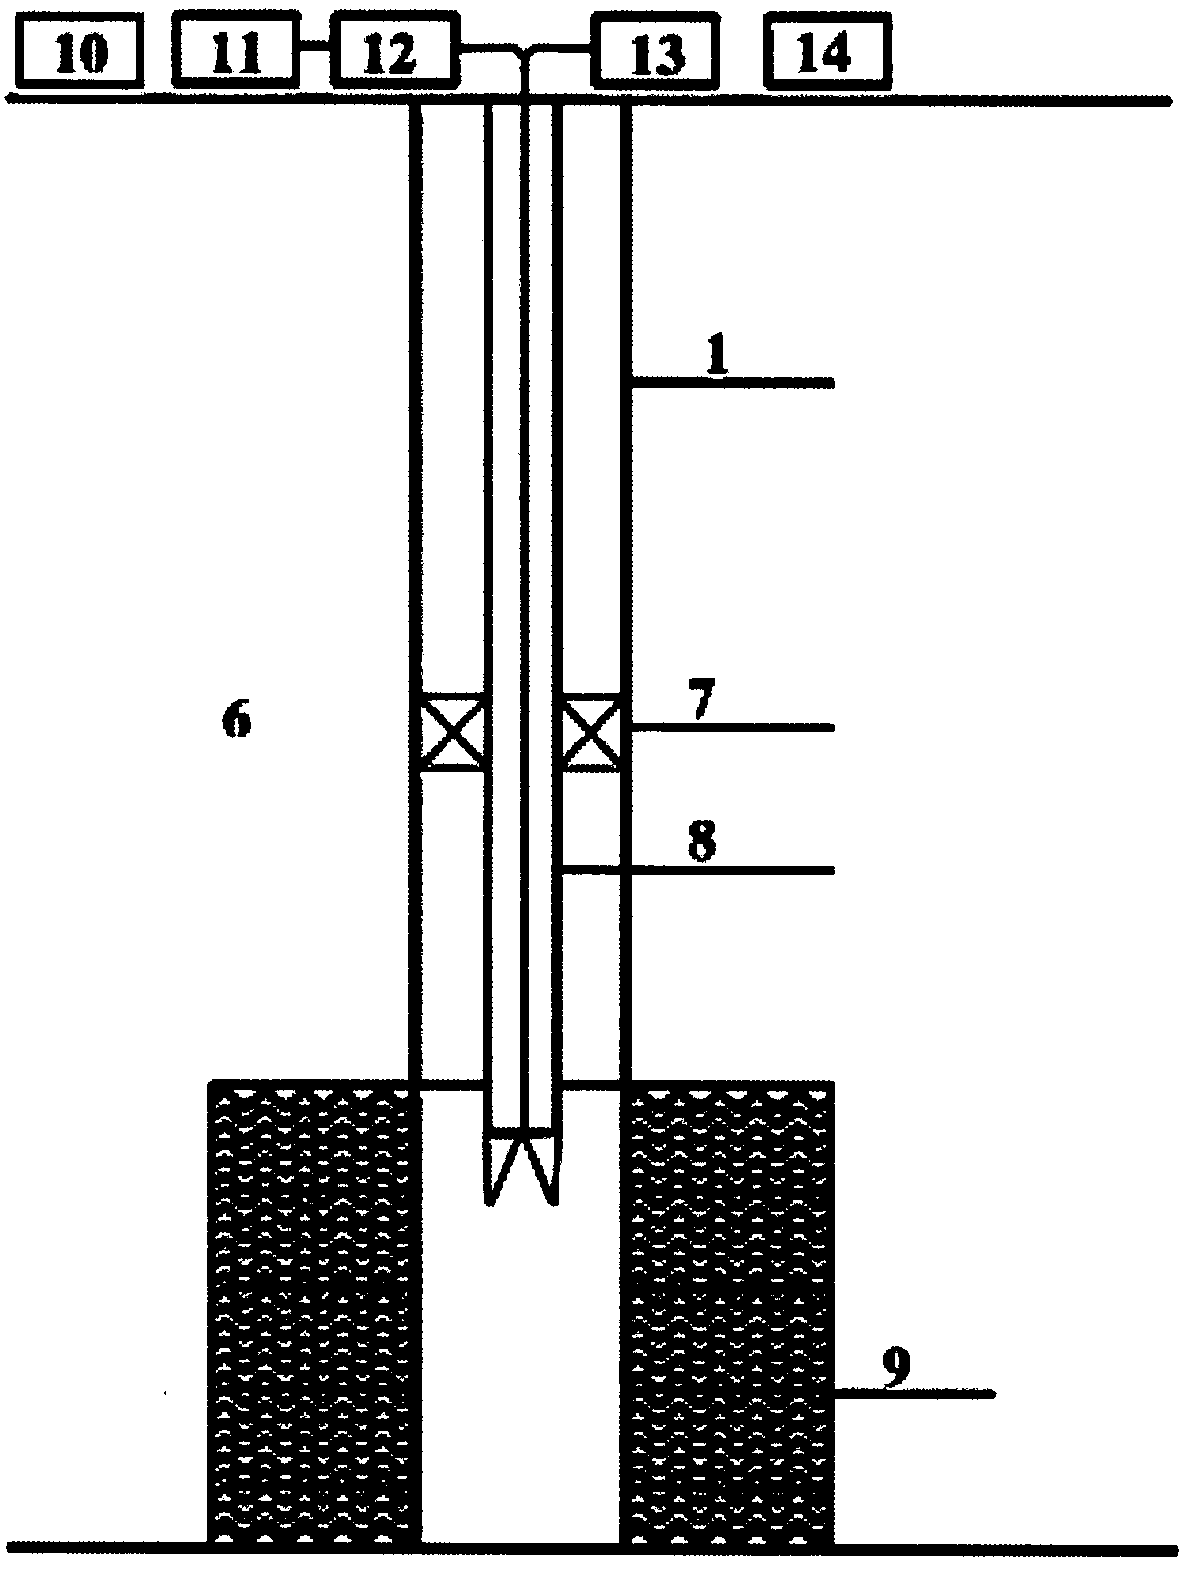 Oil recovery method of injecting air into reservoir, cracking oxygen-enriched oil and increasing temperature by electromagnetic waves